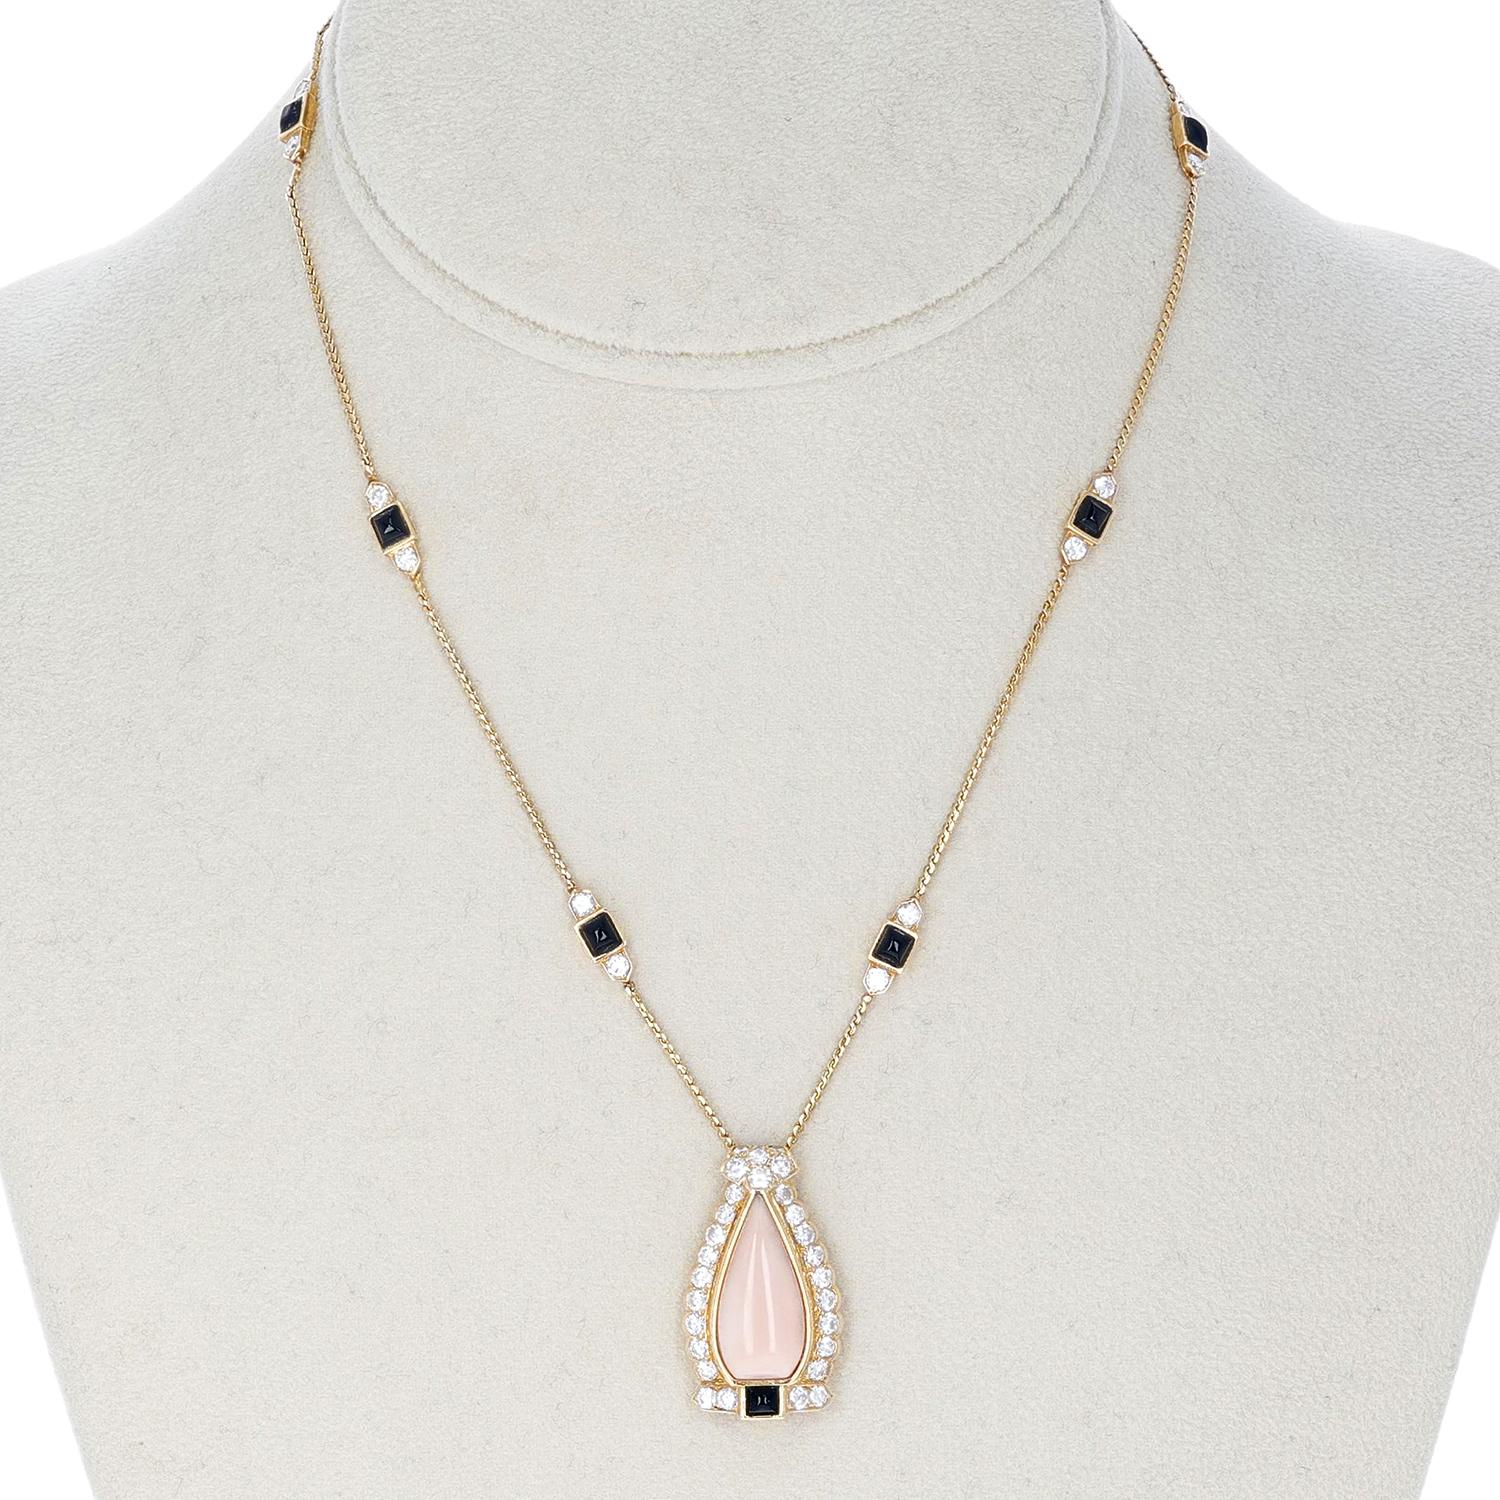 Cartier Coral, Onyx, and Diamond Necklace made in 18 Karat Yellow Gold. The total length of the necklace is 17 inches. The length of the pendant is 1 1/8 inches. The total weight is 13.77 grams. 